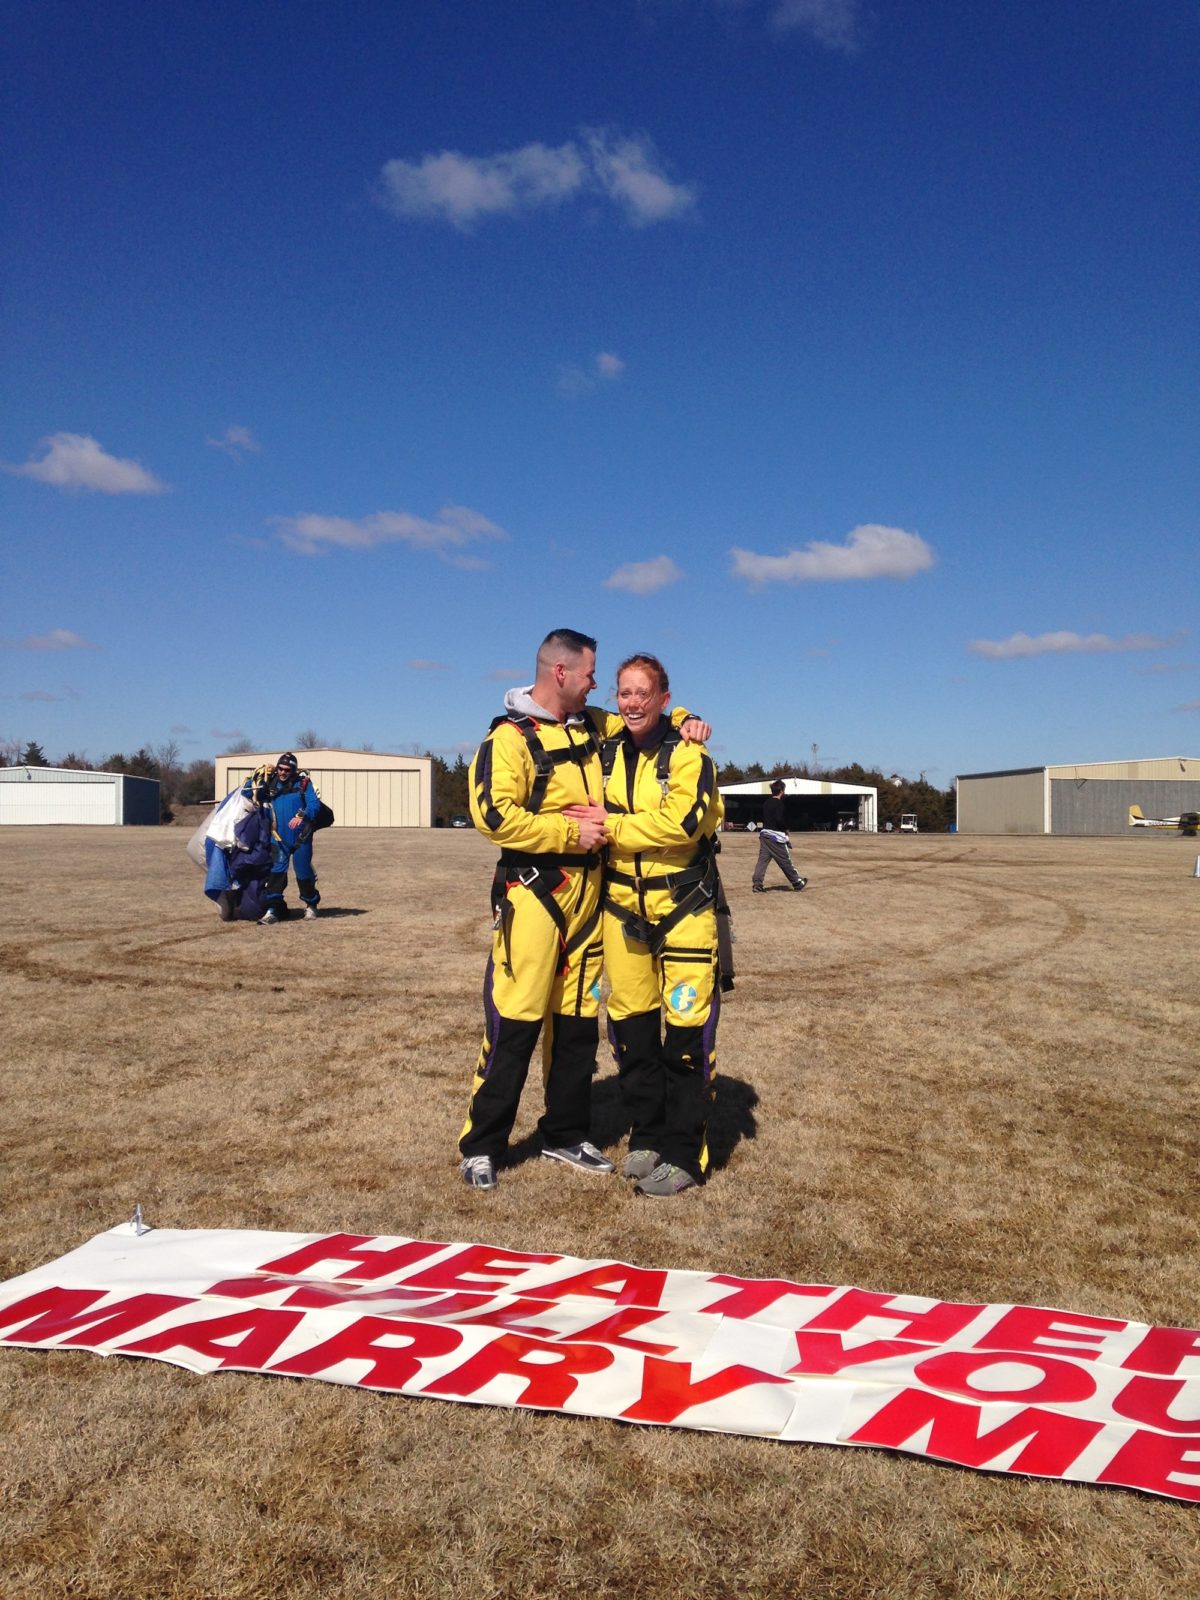 Oklahoma Special Event Skydiving Proposal